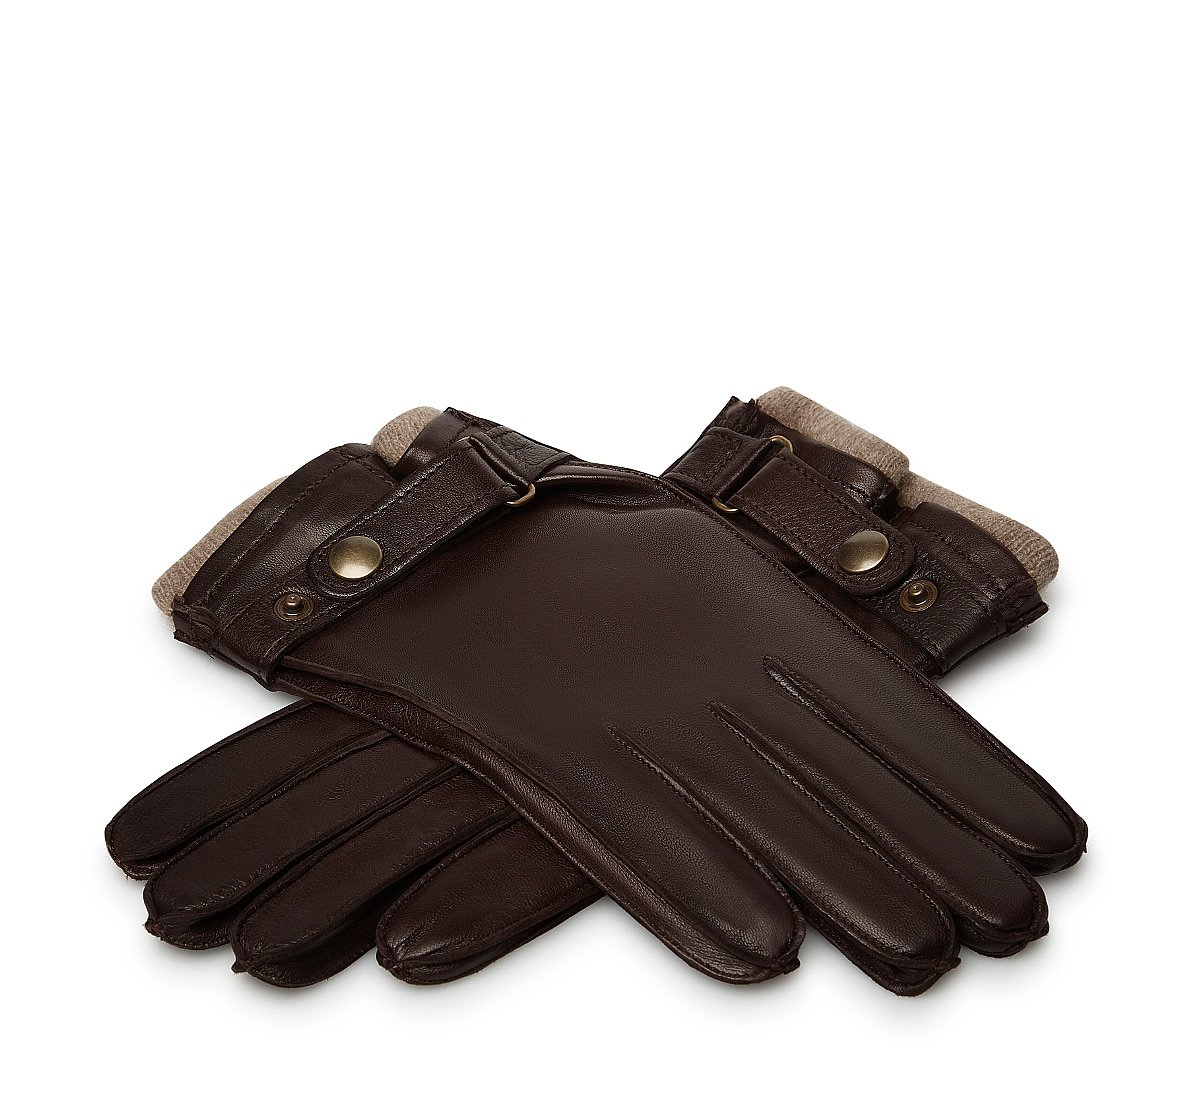 Brown gloves with strap